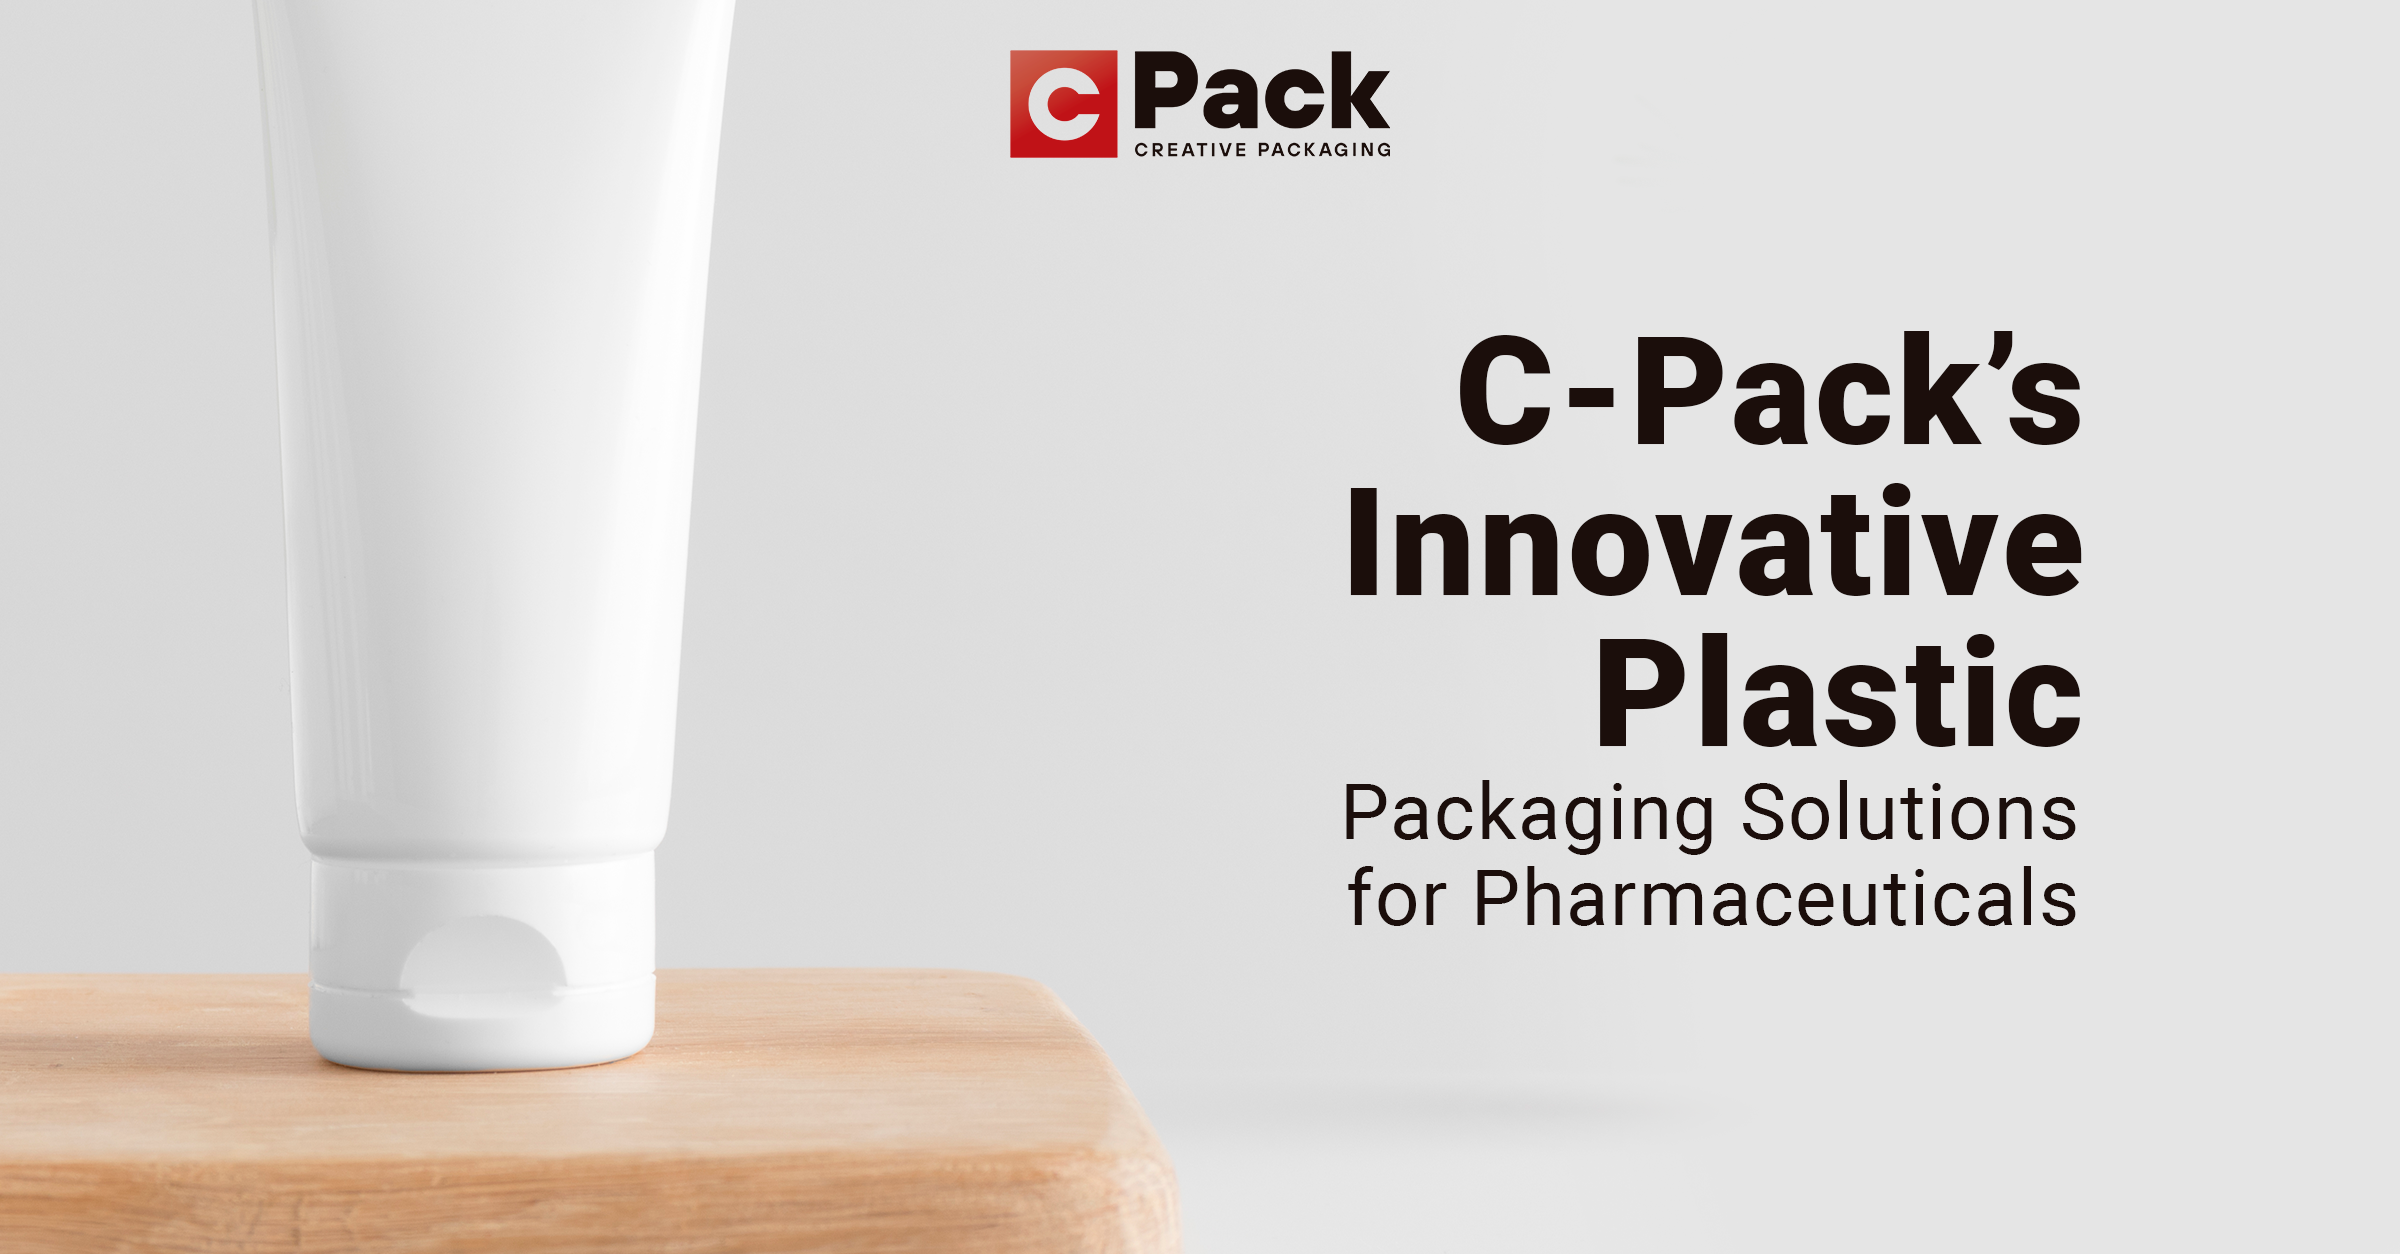 Image showcasing C-Pack's innovative plastic packaging solutions for pharmaceuticals.